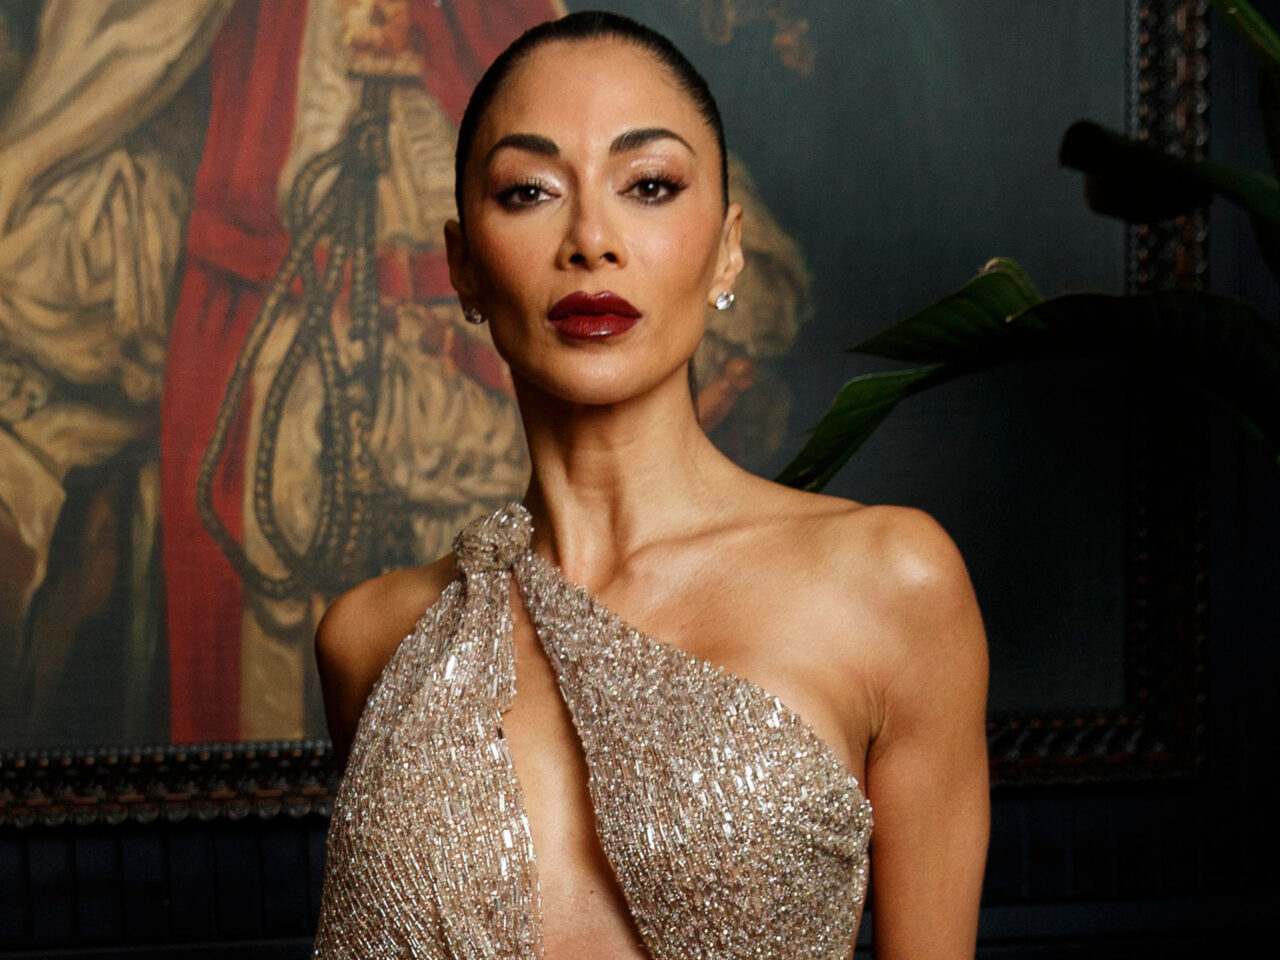 Nicole Scherzinger on Taking the West End by Storm in Sunset Boulevard